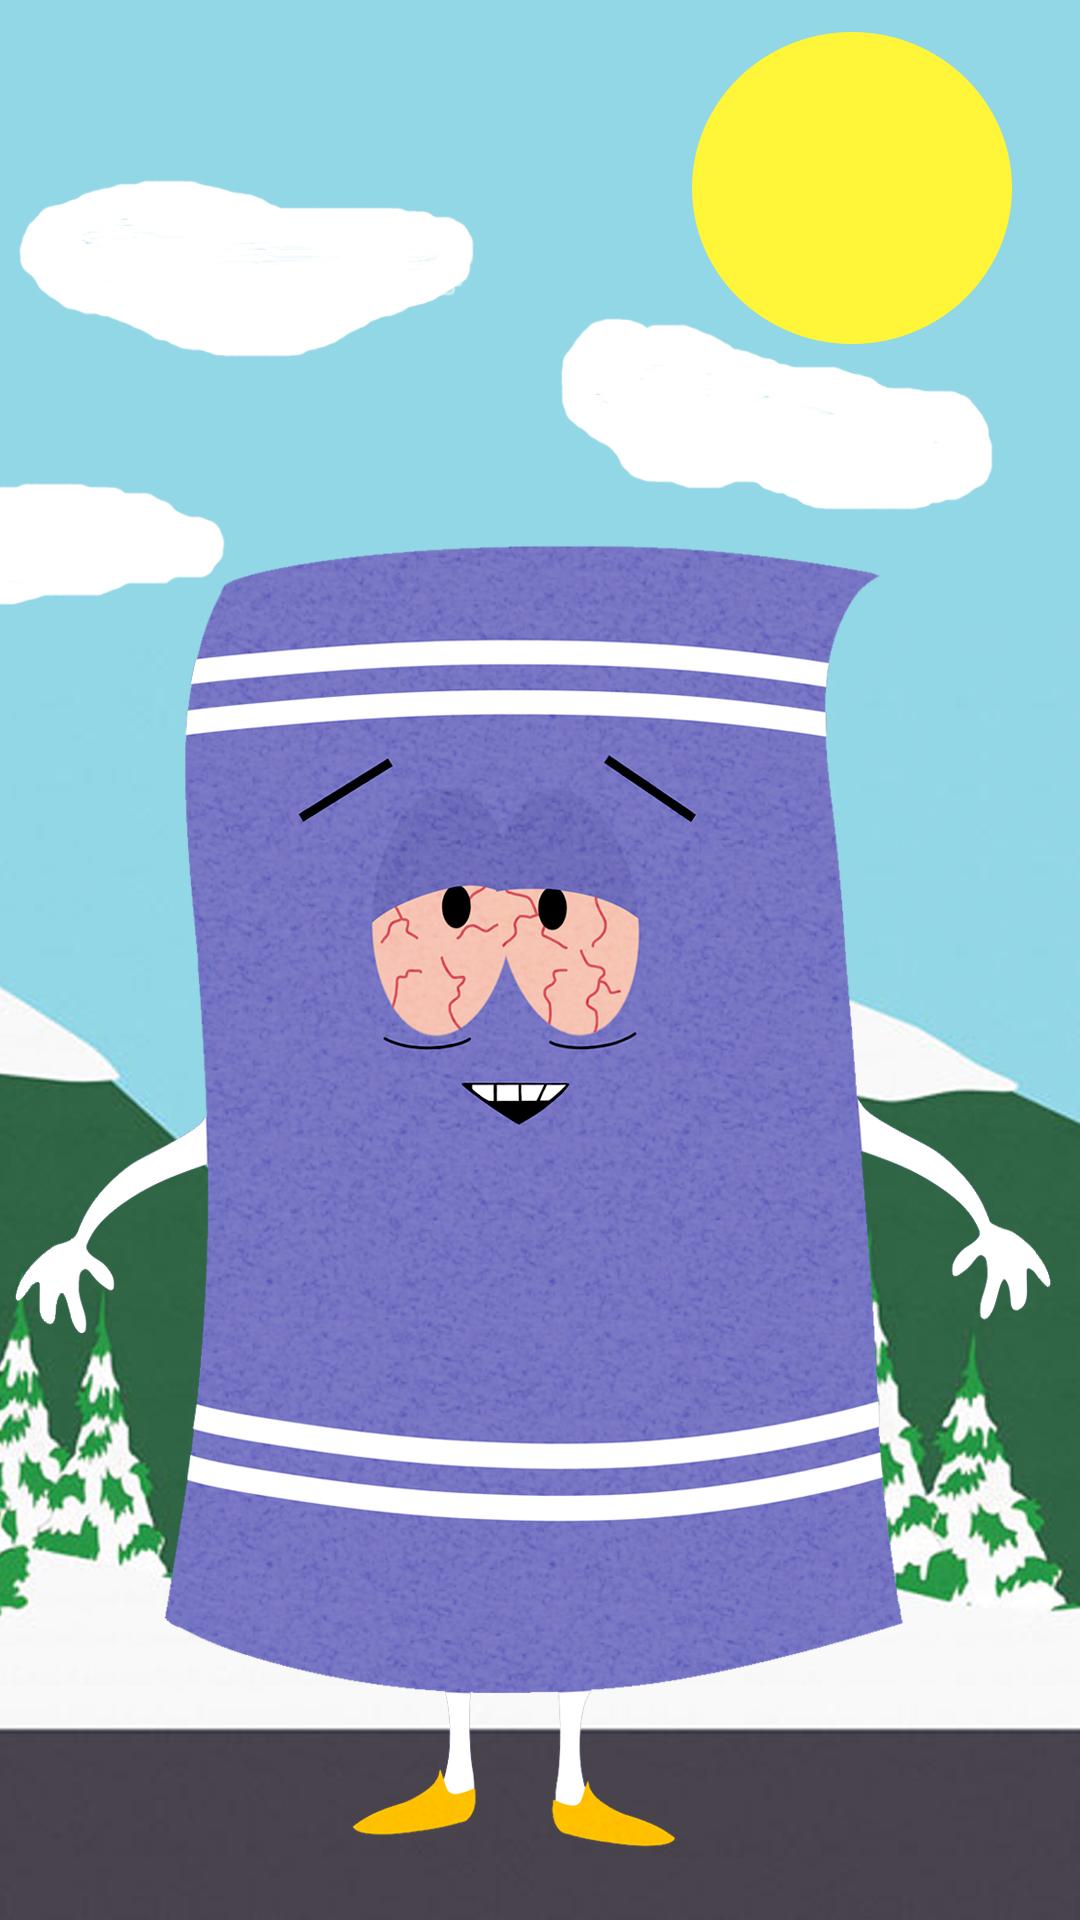 Made a Towelie wallpaper (iPhone 6 Plus): iphonewallpaper